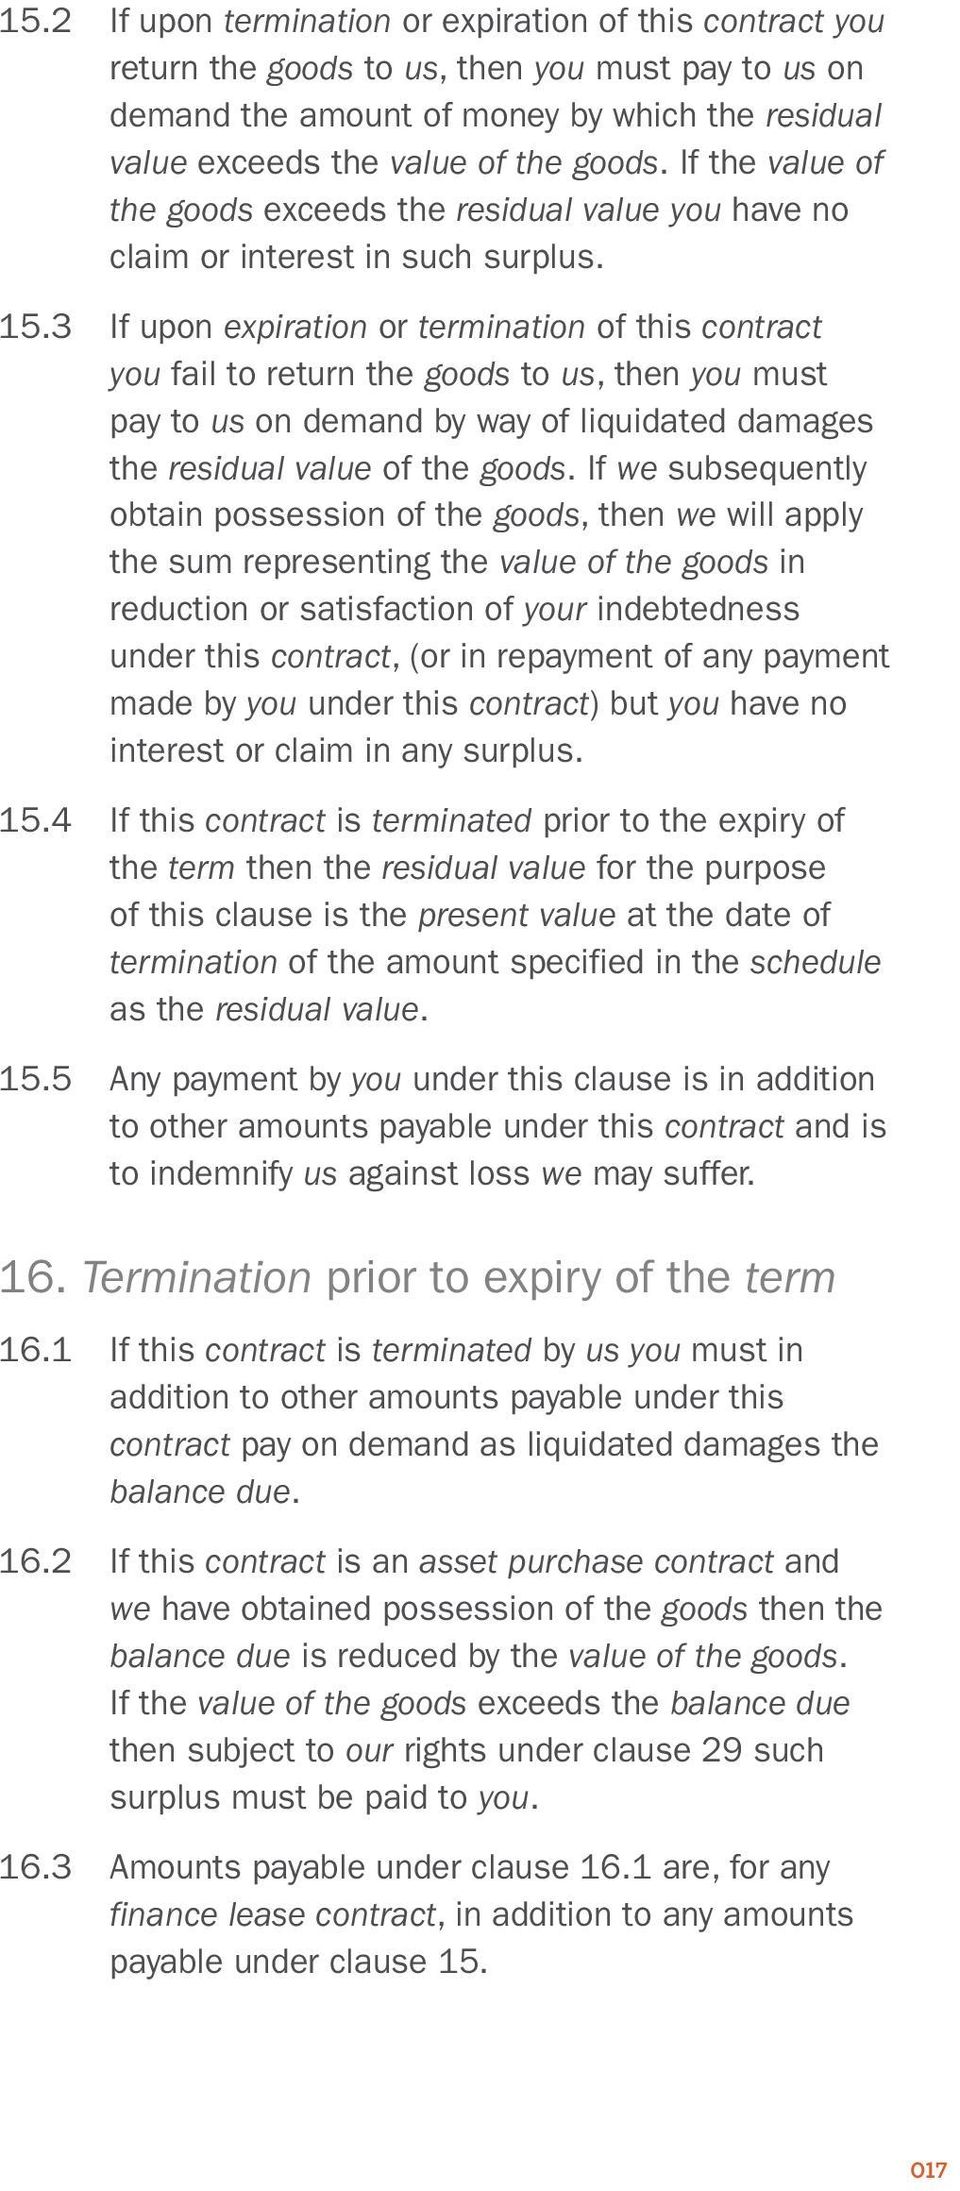 3 If upon expiration or termination of this contract you fail to return the goods to us, then you must pay to us on demand by way of liquidated damages the residual value of the goods.